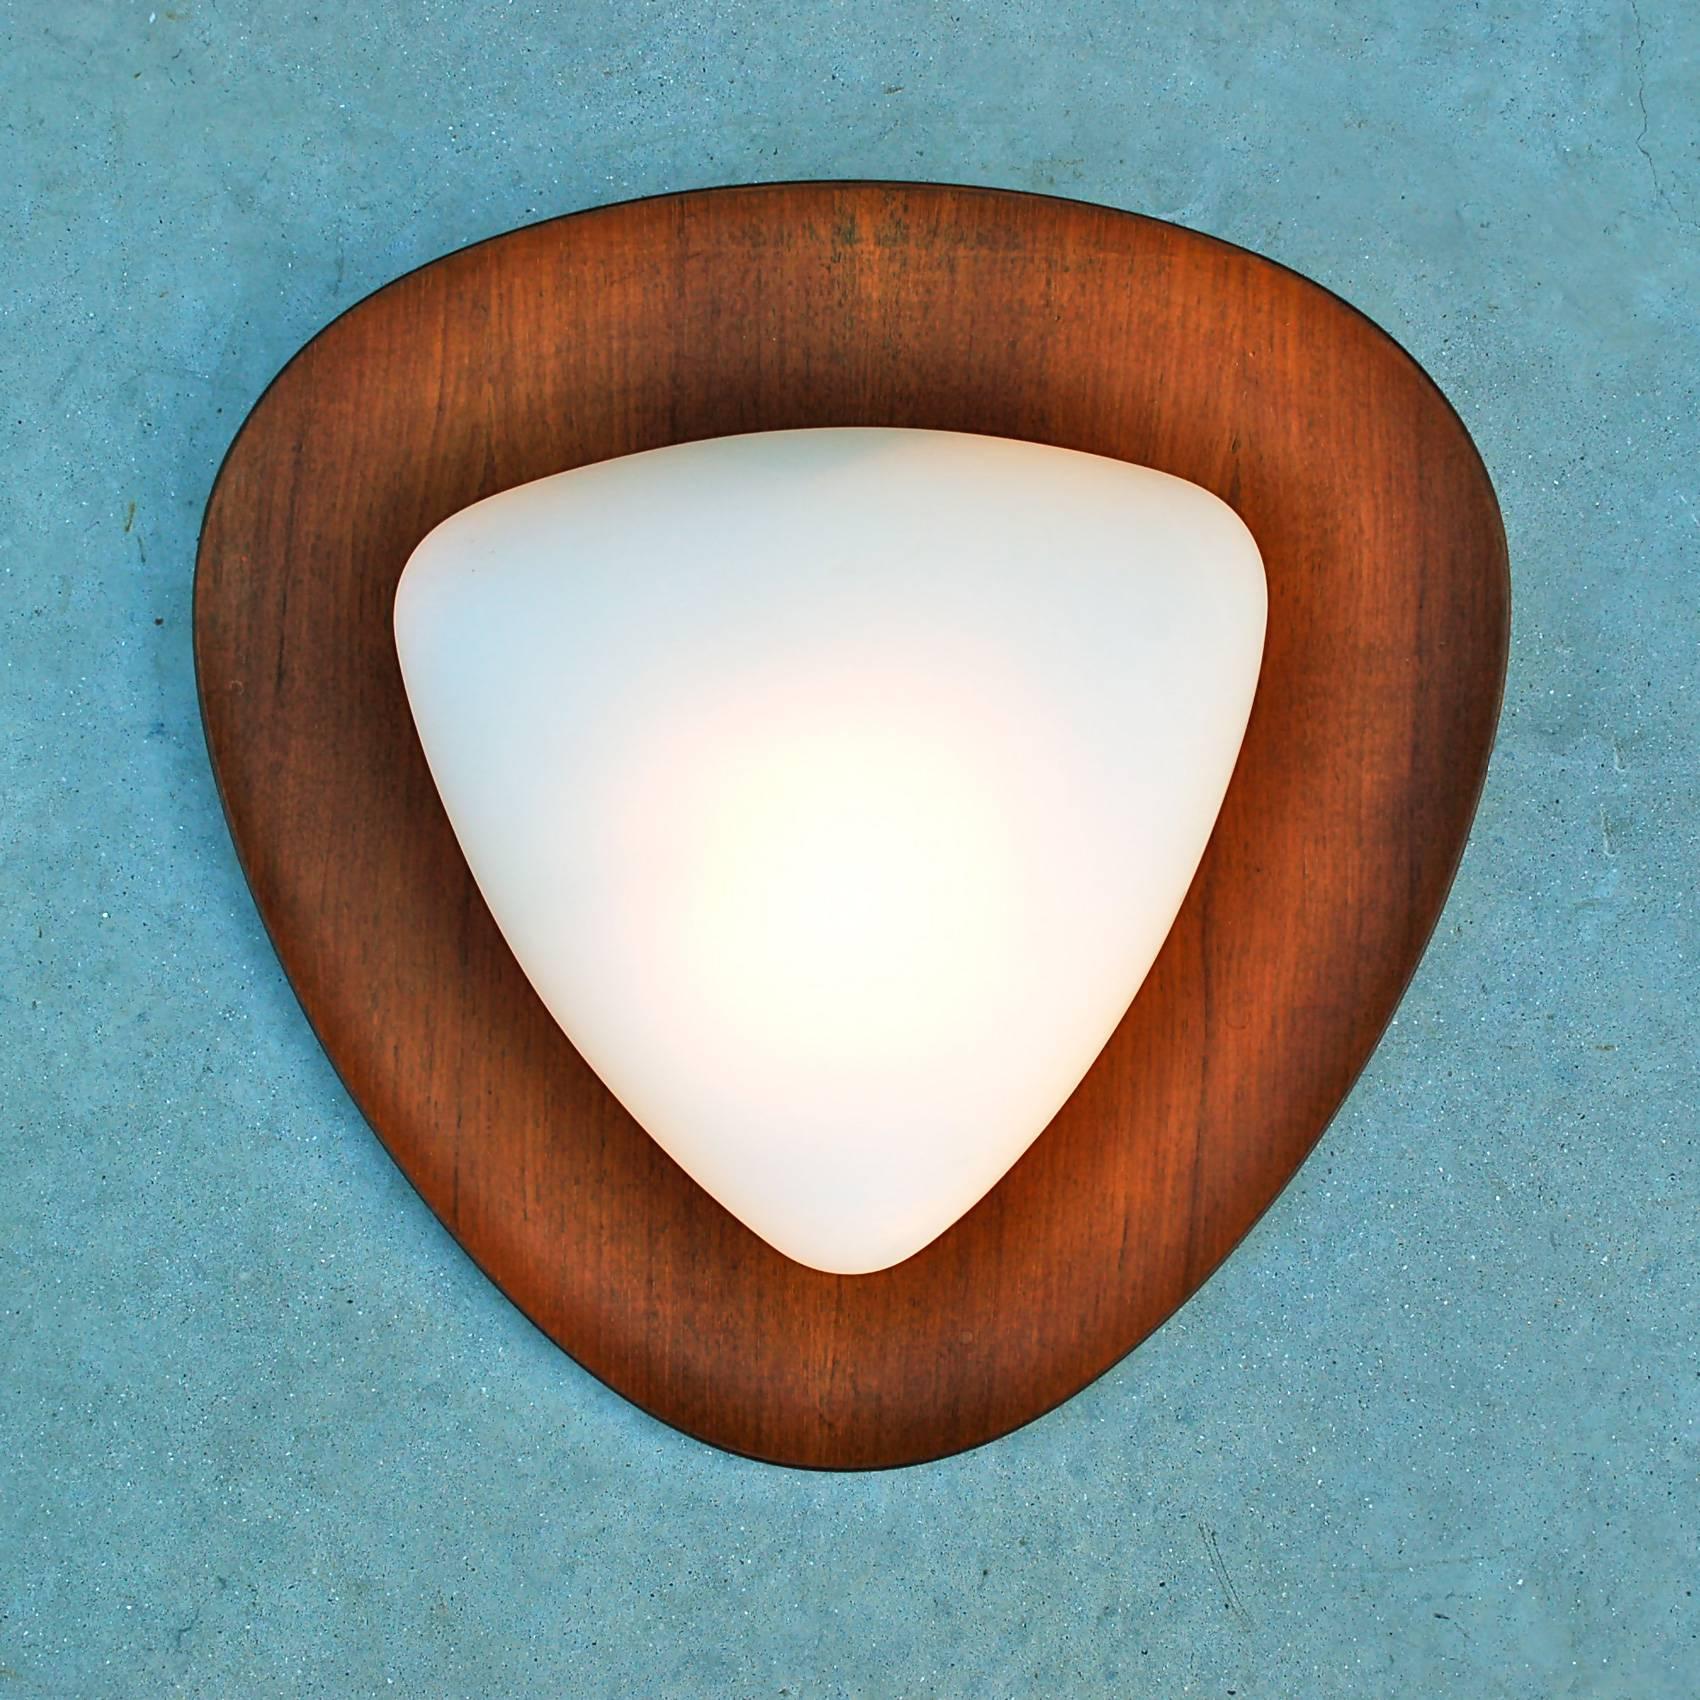 Triangular shaped wall light designed by Goffredo Reggiani on a teak wooden base with opaline shade which produces an atmospheric diffuse light. The sconce is fitted with a standard European screw bulb fitting and wiring. We can rewire/refit on